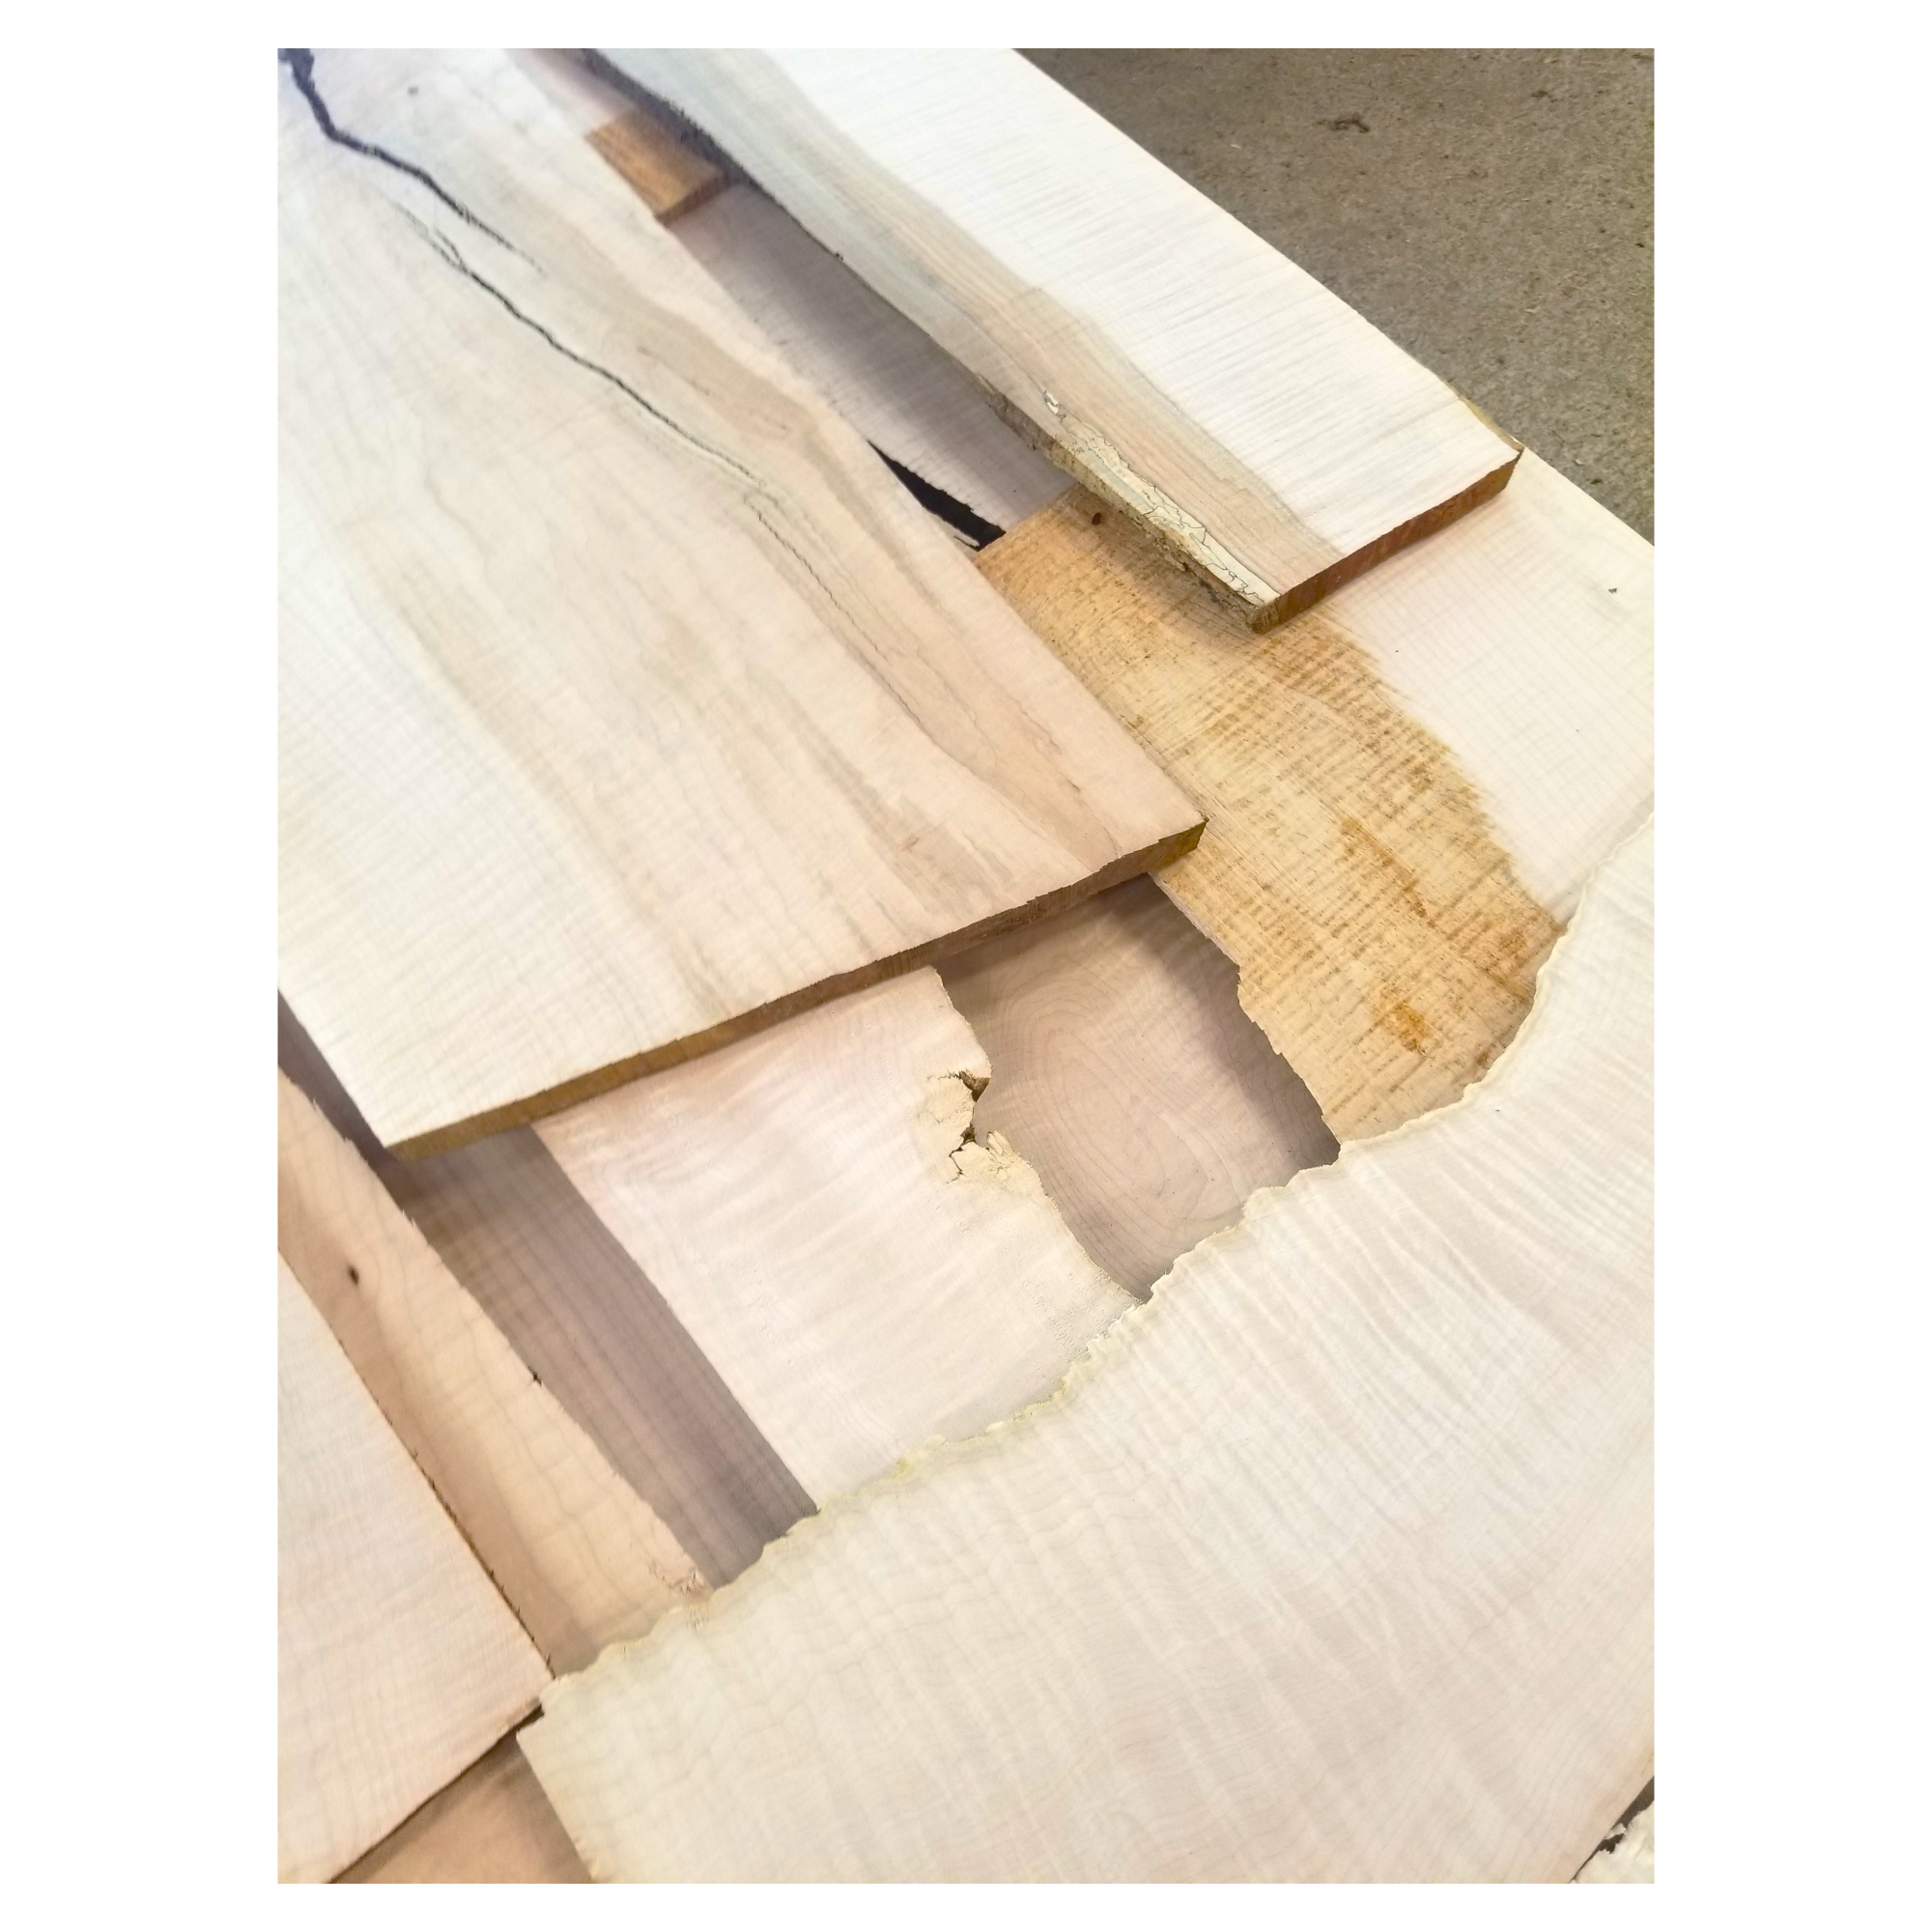 Examples of high figure maple mill ends.  Several pieces in varying lengths, widths, and colors.